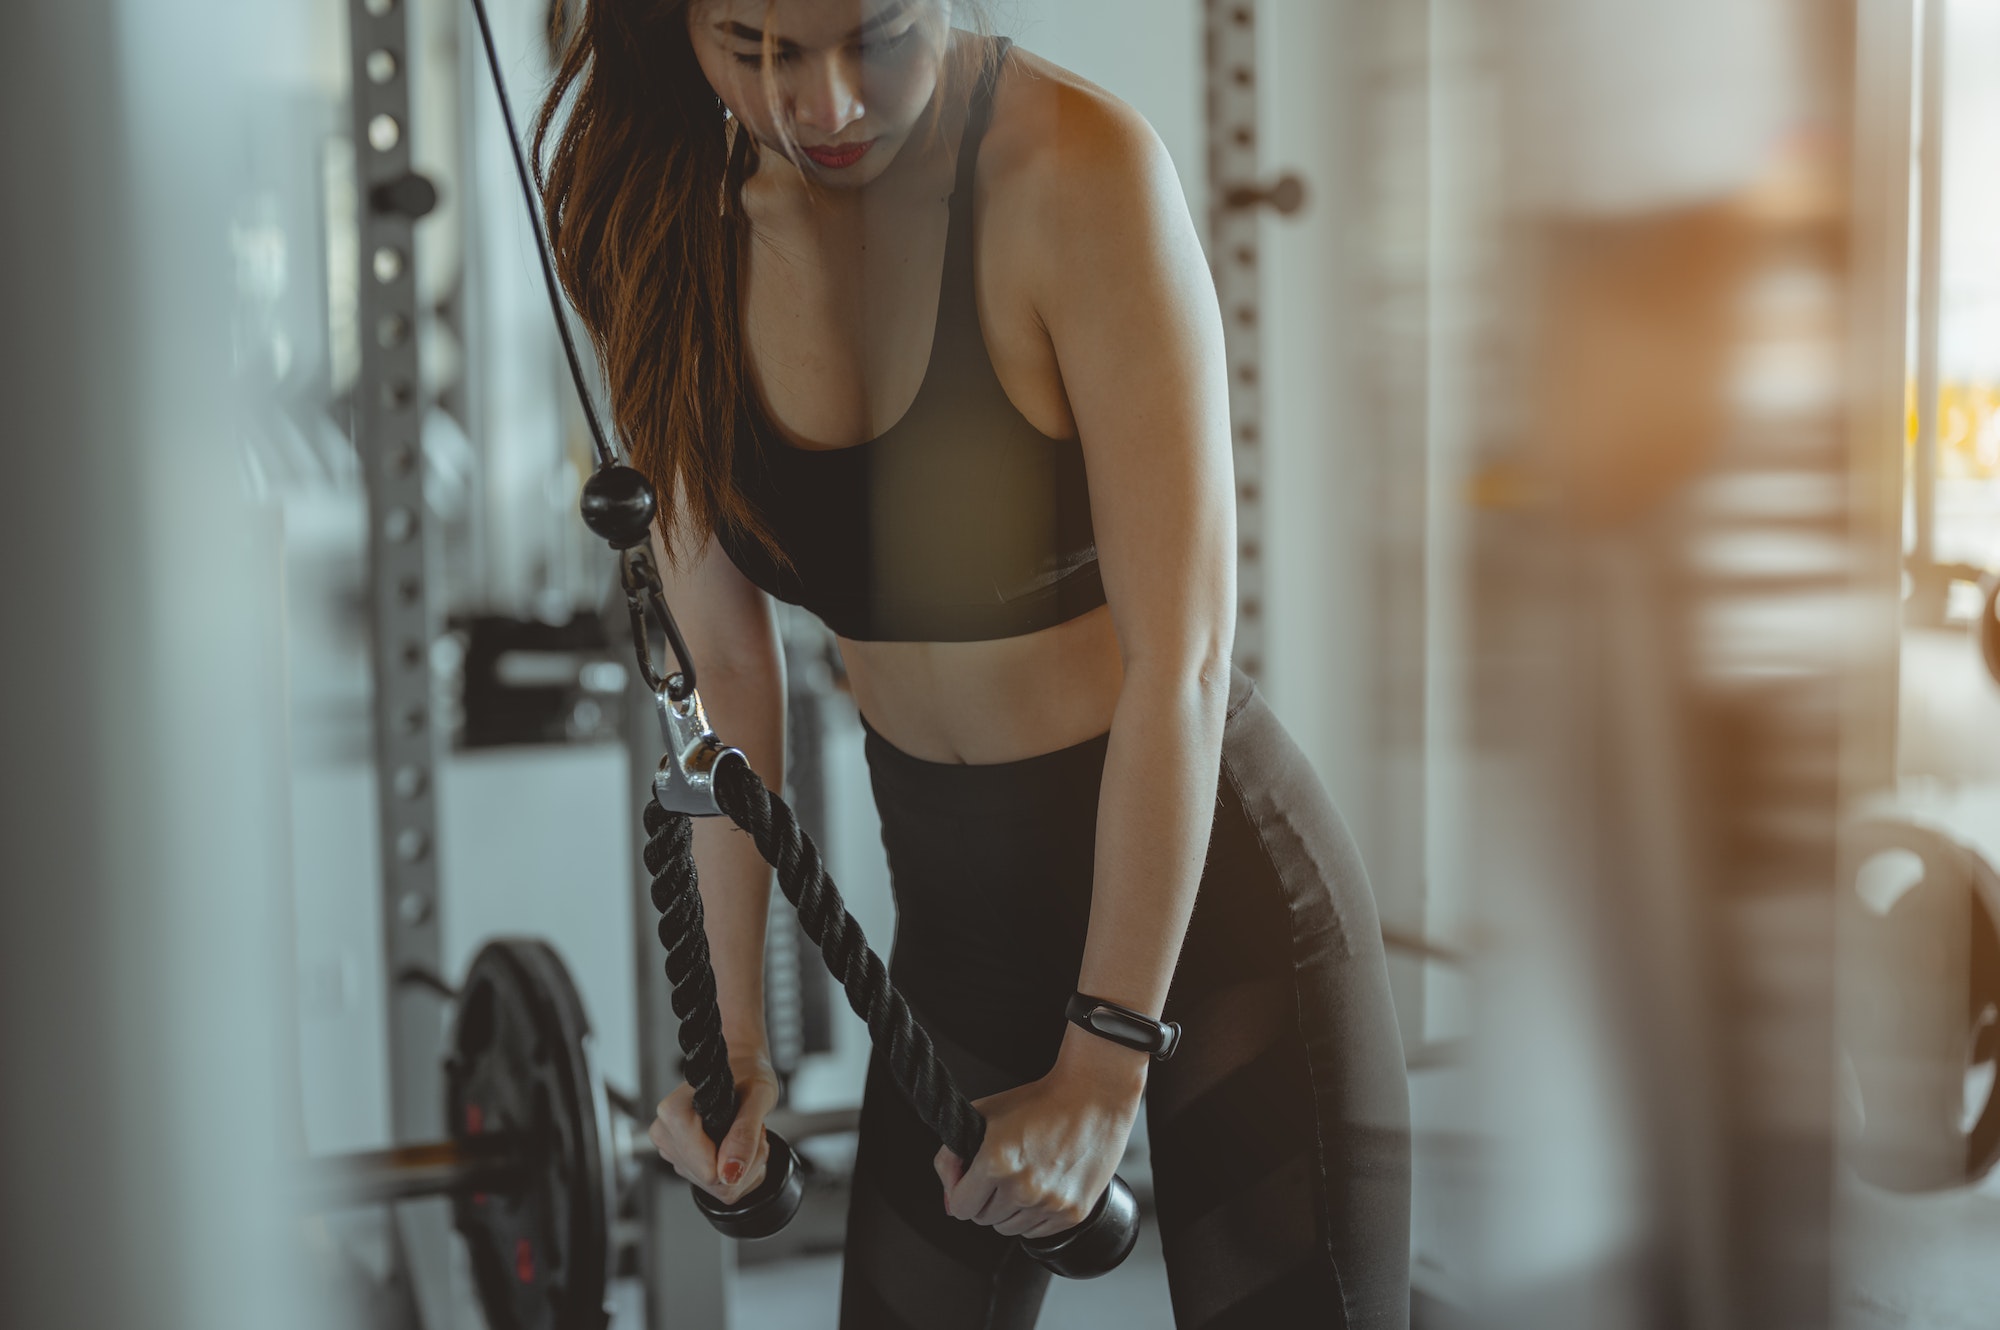 A women working out training arms in gym gaining weight pumping up muscles with dumbbells